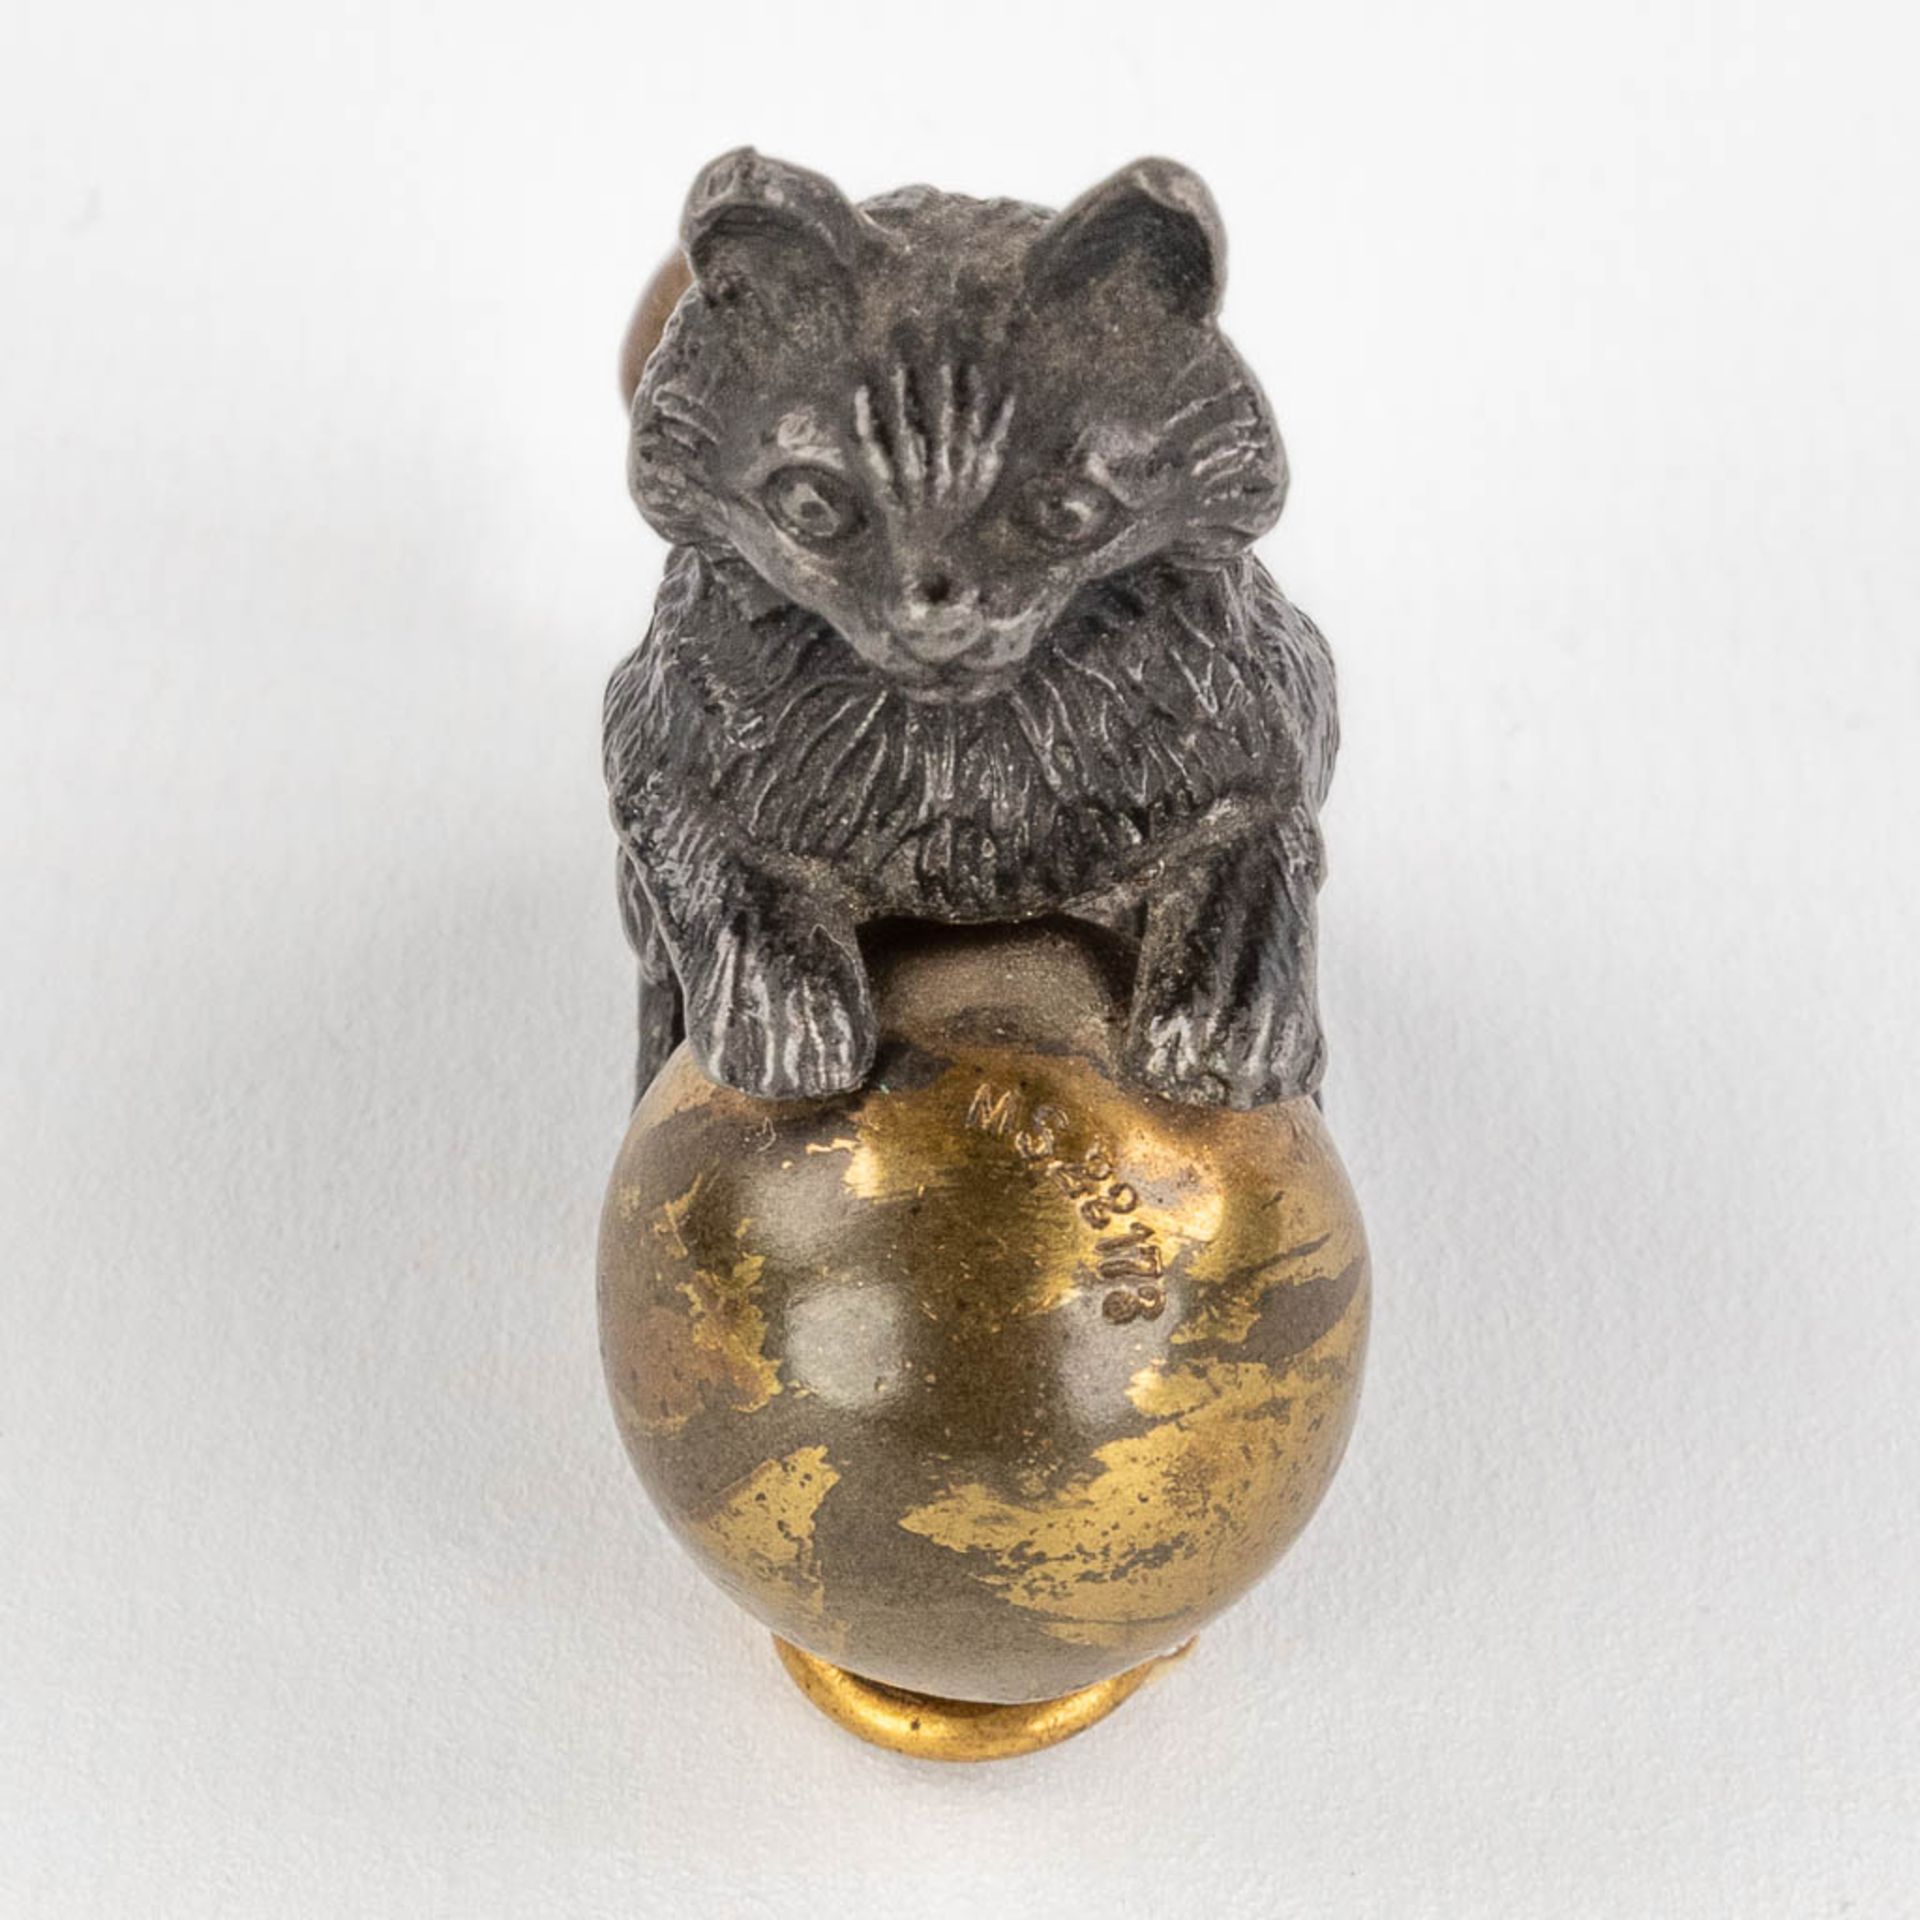 An antique tape measure, in the shape of a cat with a ball, Vienna bronze. 19th century. (H: 4,2 cm) - Image 9 of 18